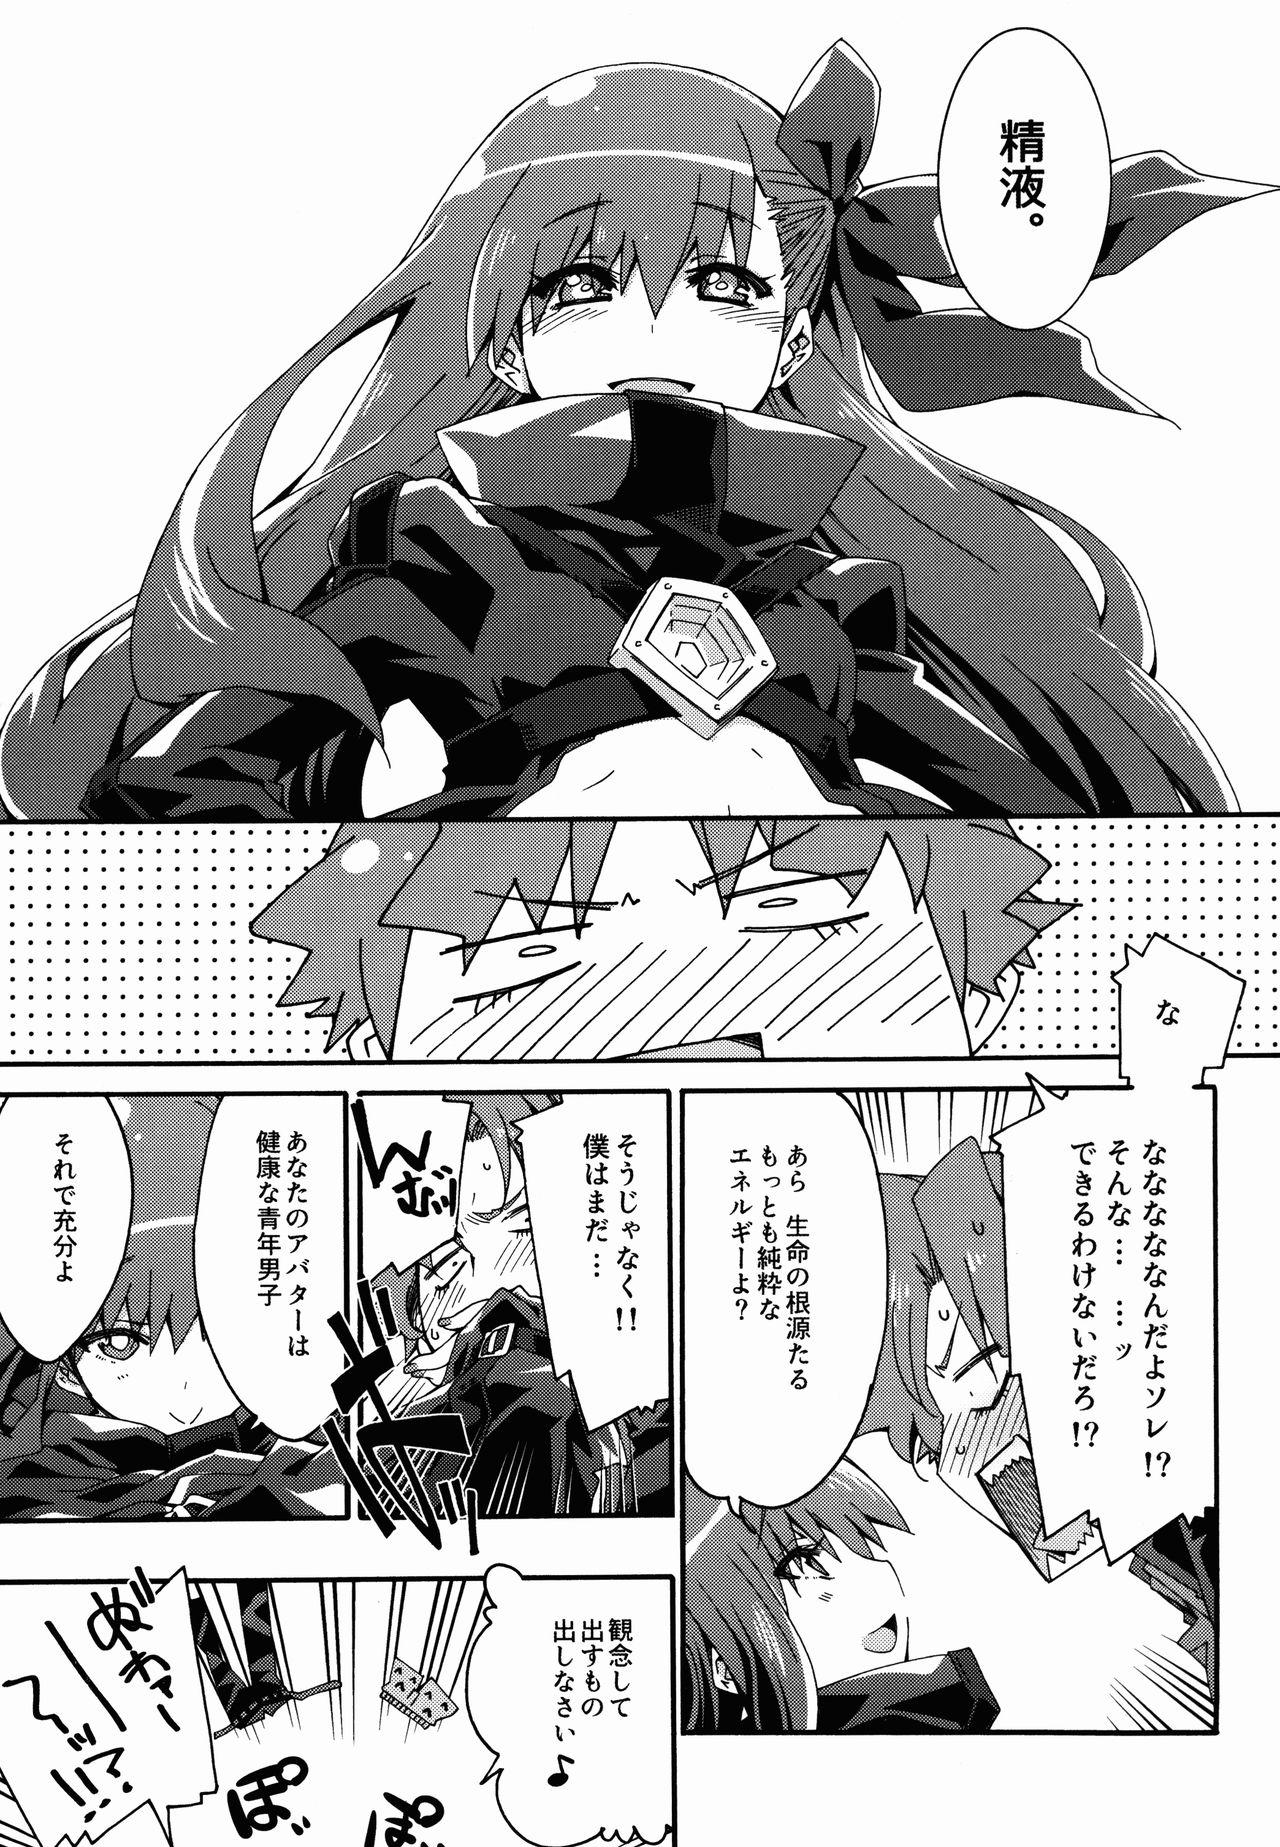 Infiel Melty/kiss - Fate extra Interview - Page 11